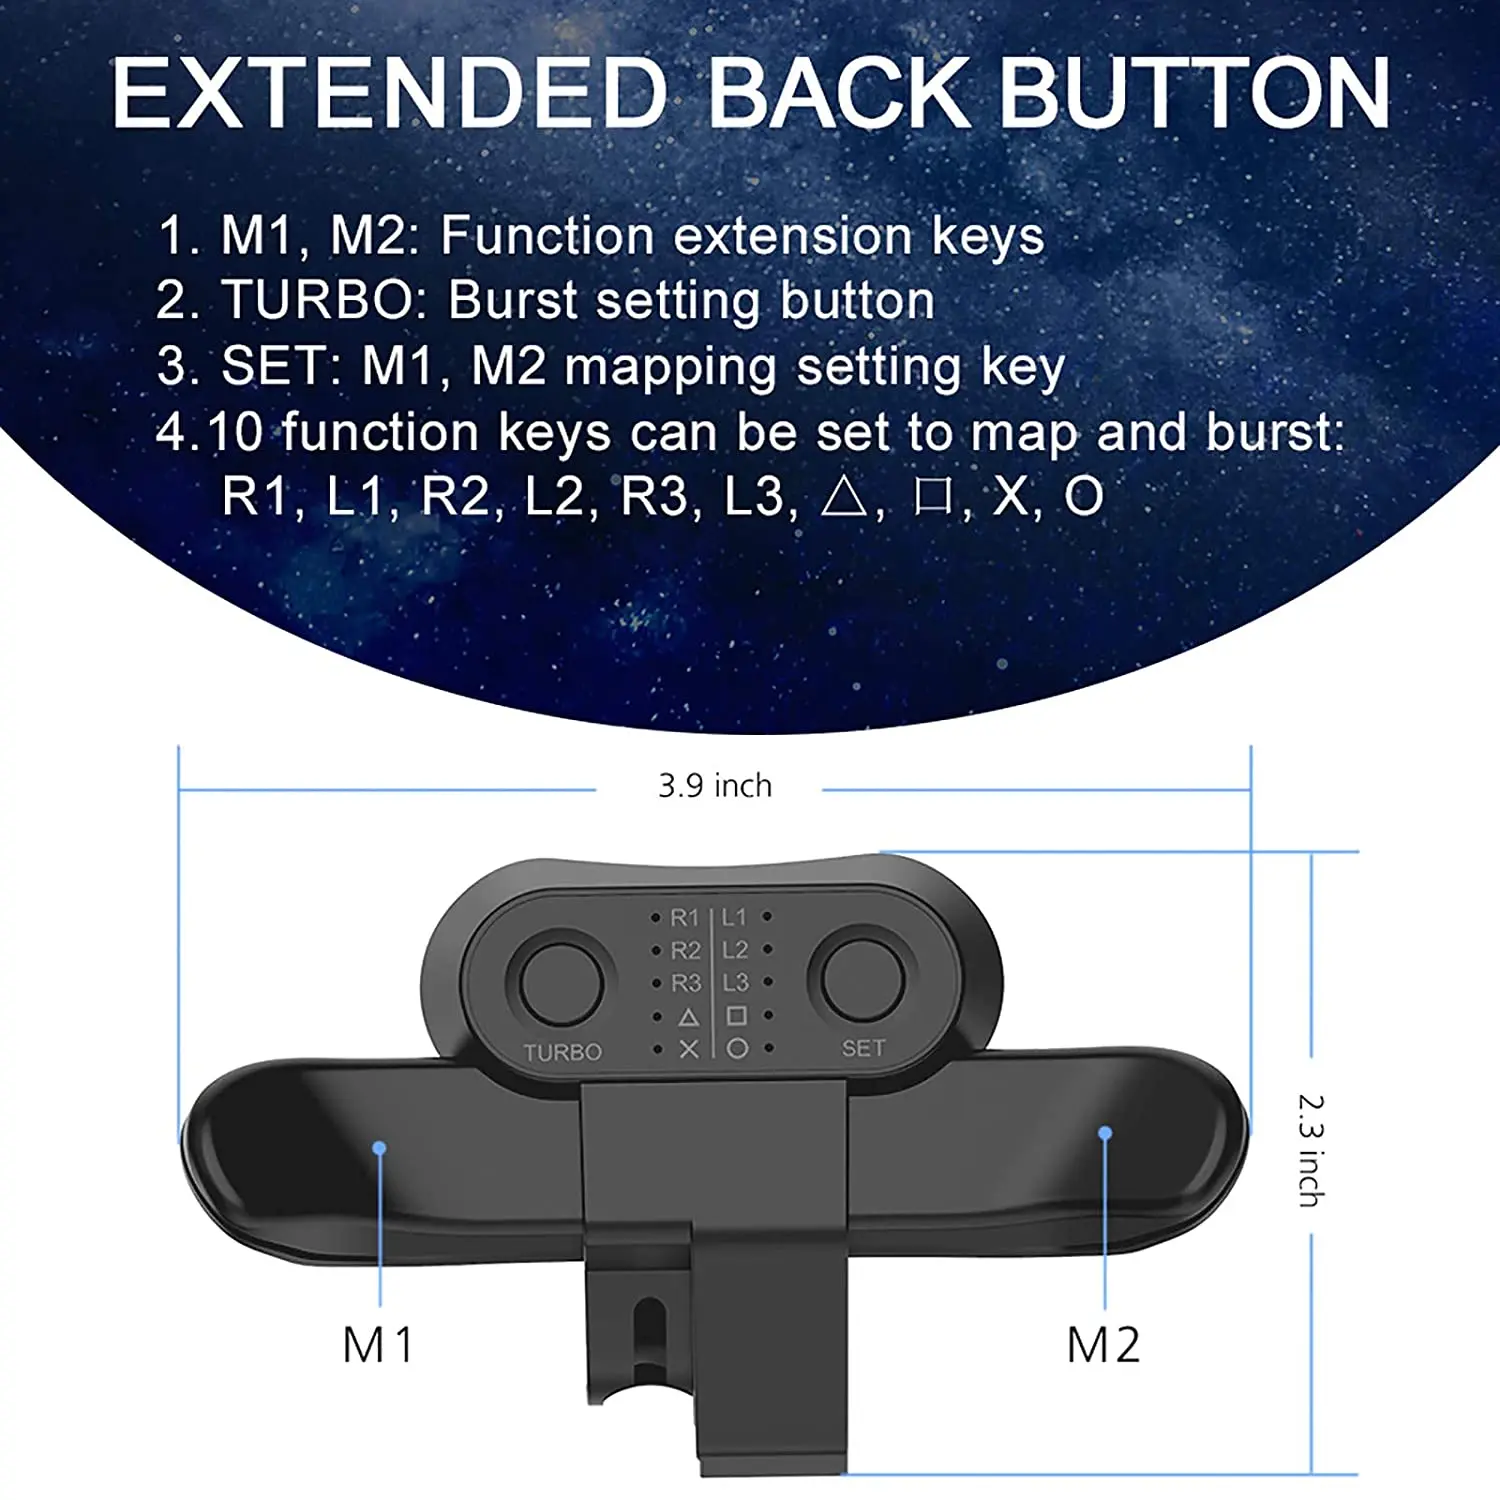 Back Button Attachment Handle Expansion Adapter for PS4/Slim/Pro Controller